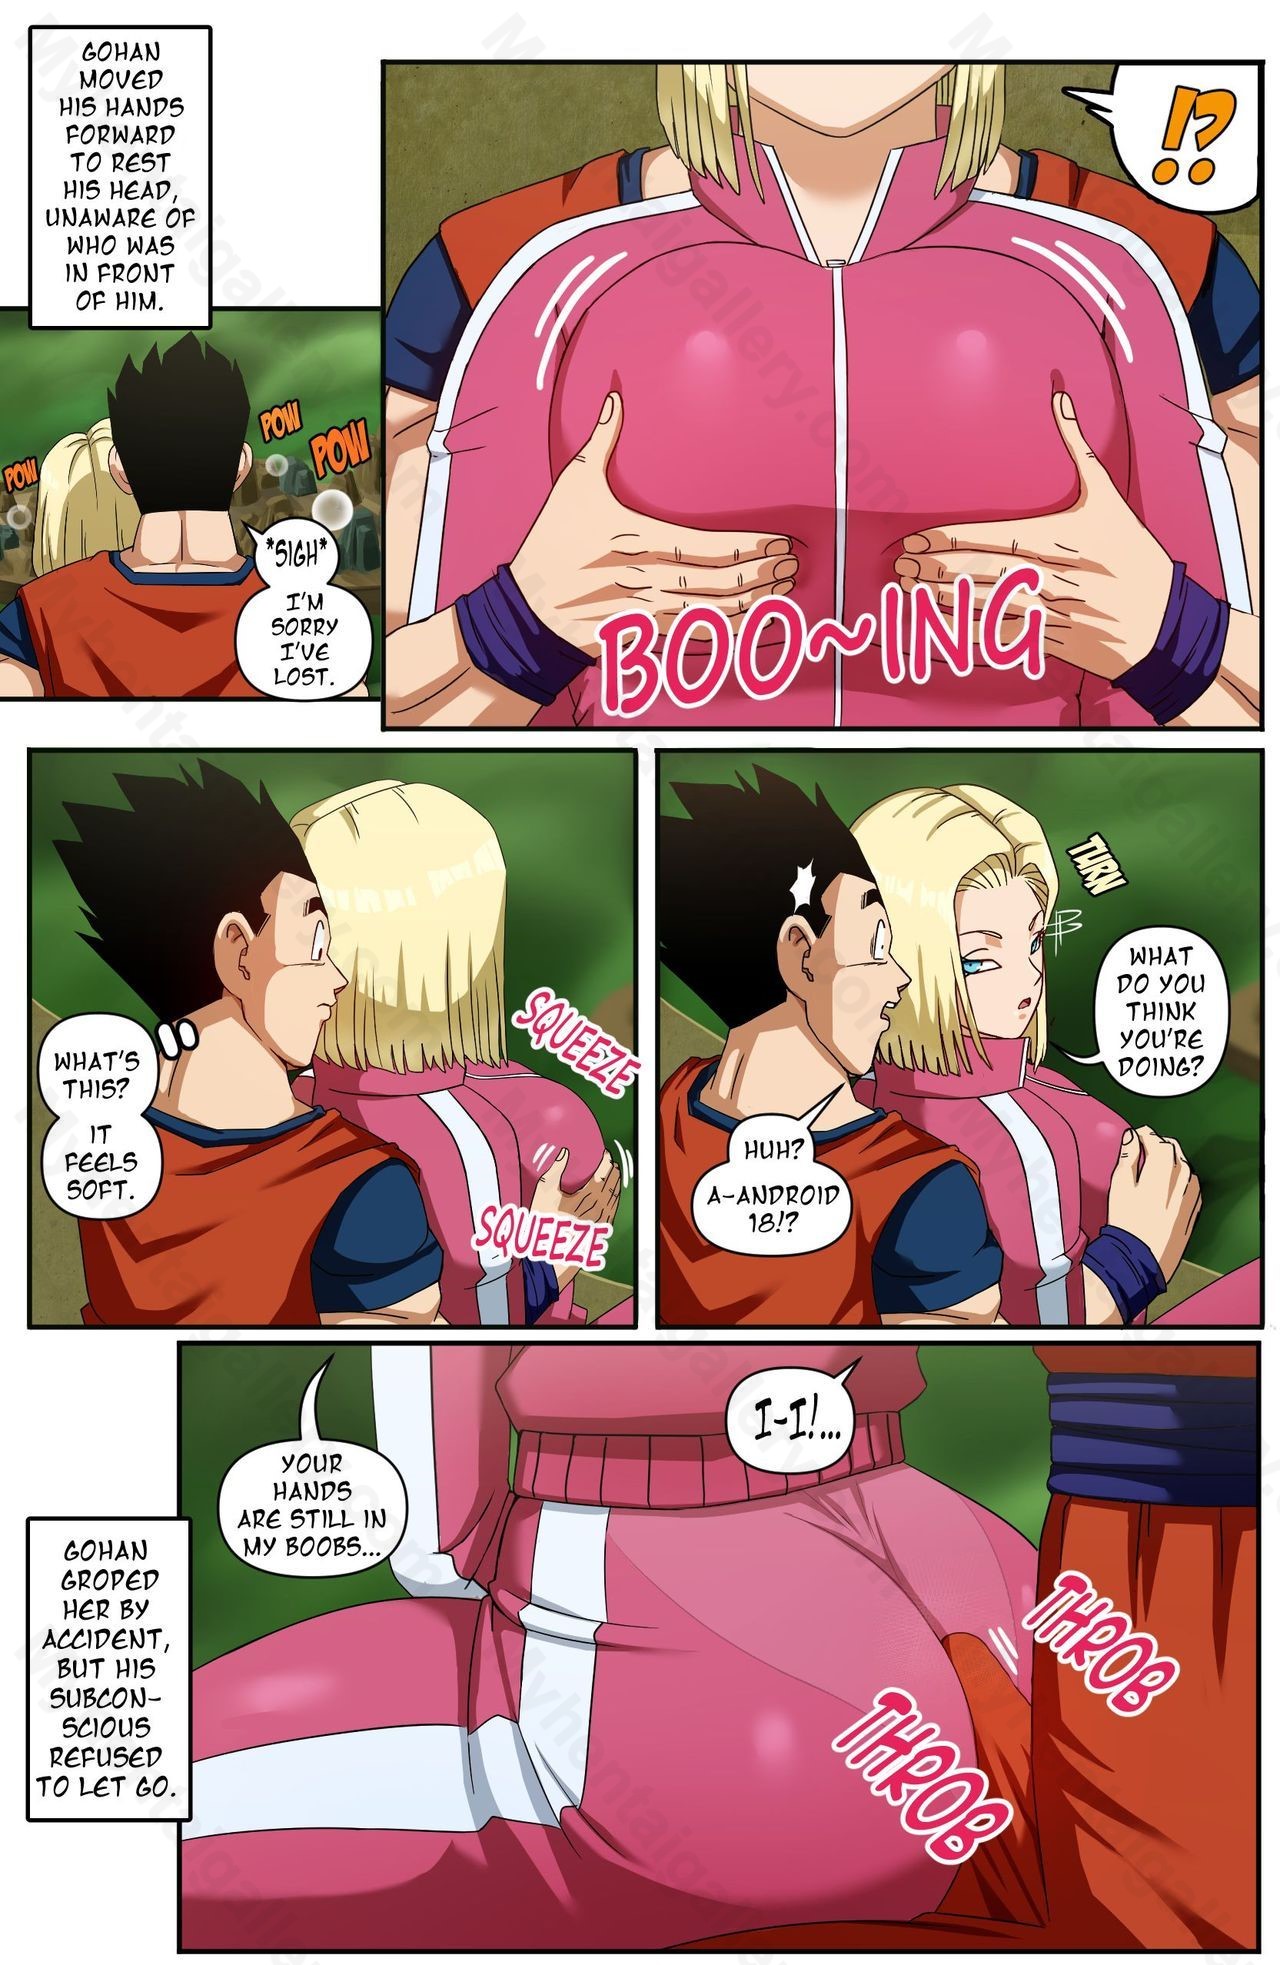 Android 18 Porn Gallery - Android 18 & Gohan 2 Porn Comic - Page 003_1